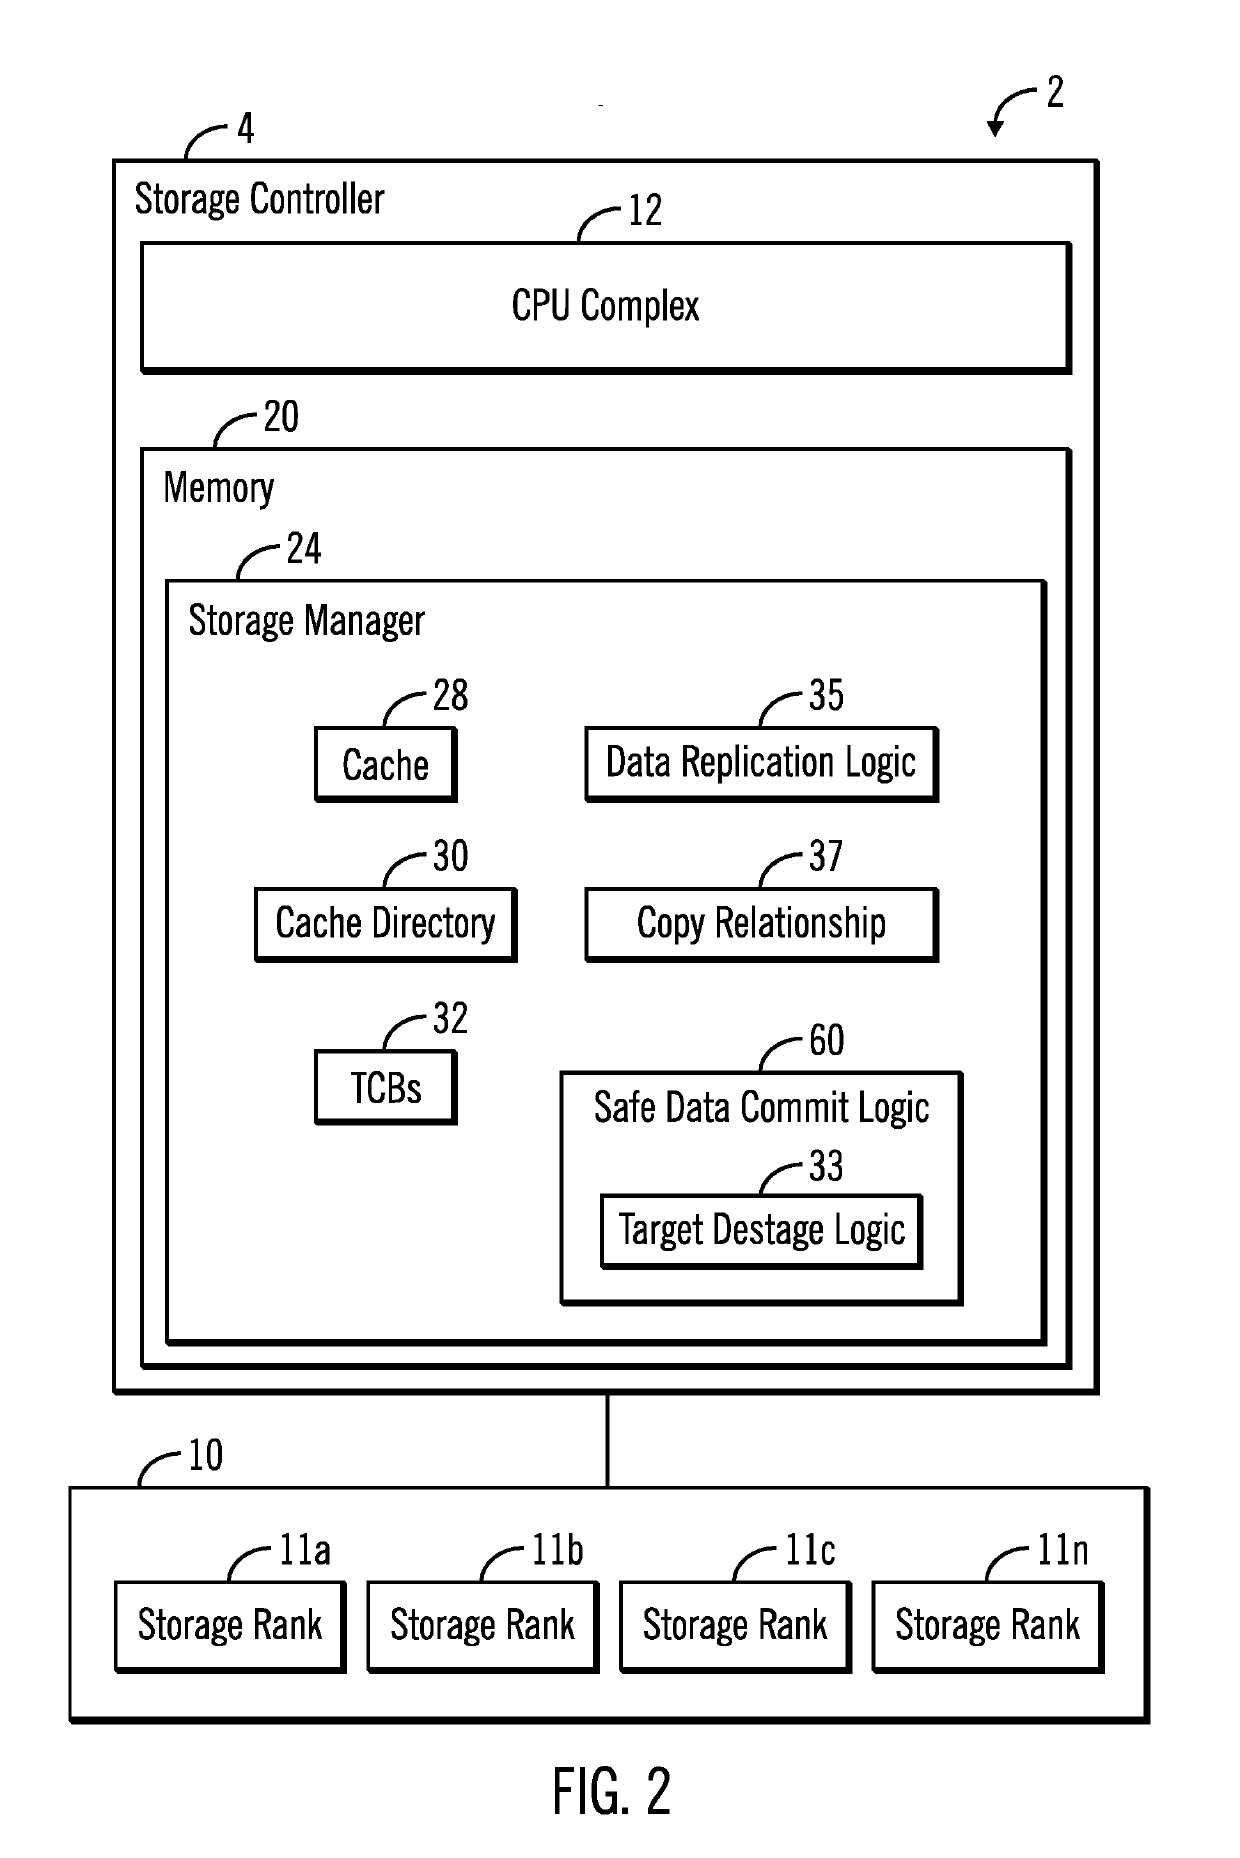 Copy source to target management in a data storage system